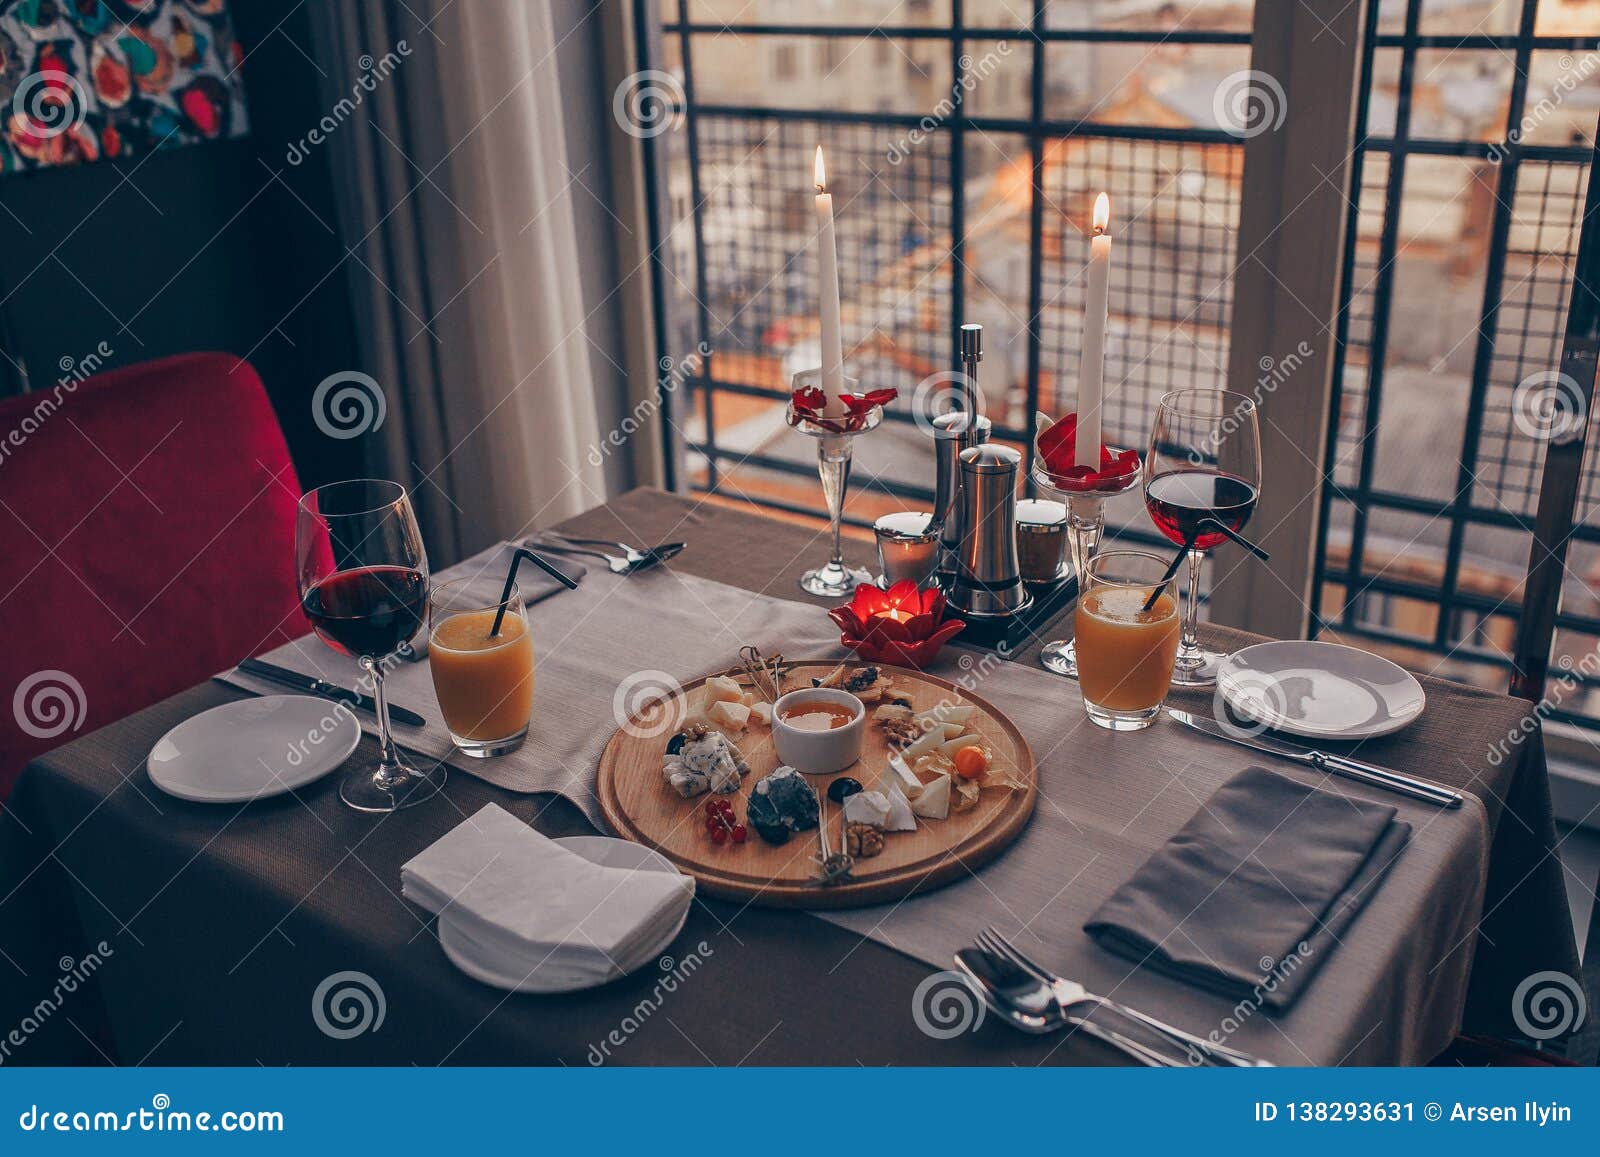 Romantic Dinner For Two Stock Image Image Of Cheeseplate 138293631,Red Orange And Blue Color Combinations